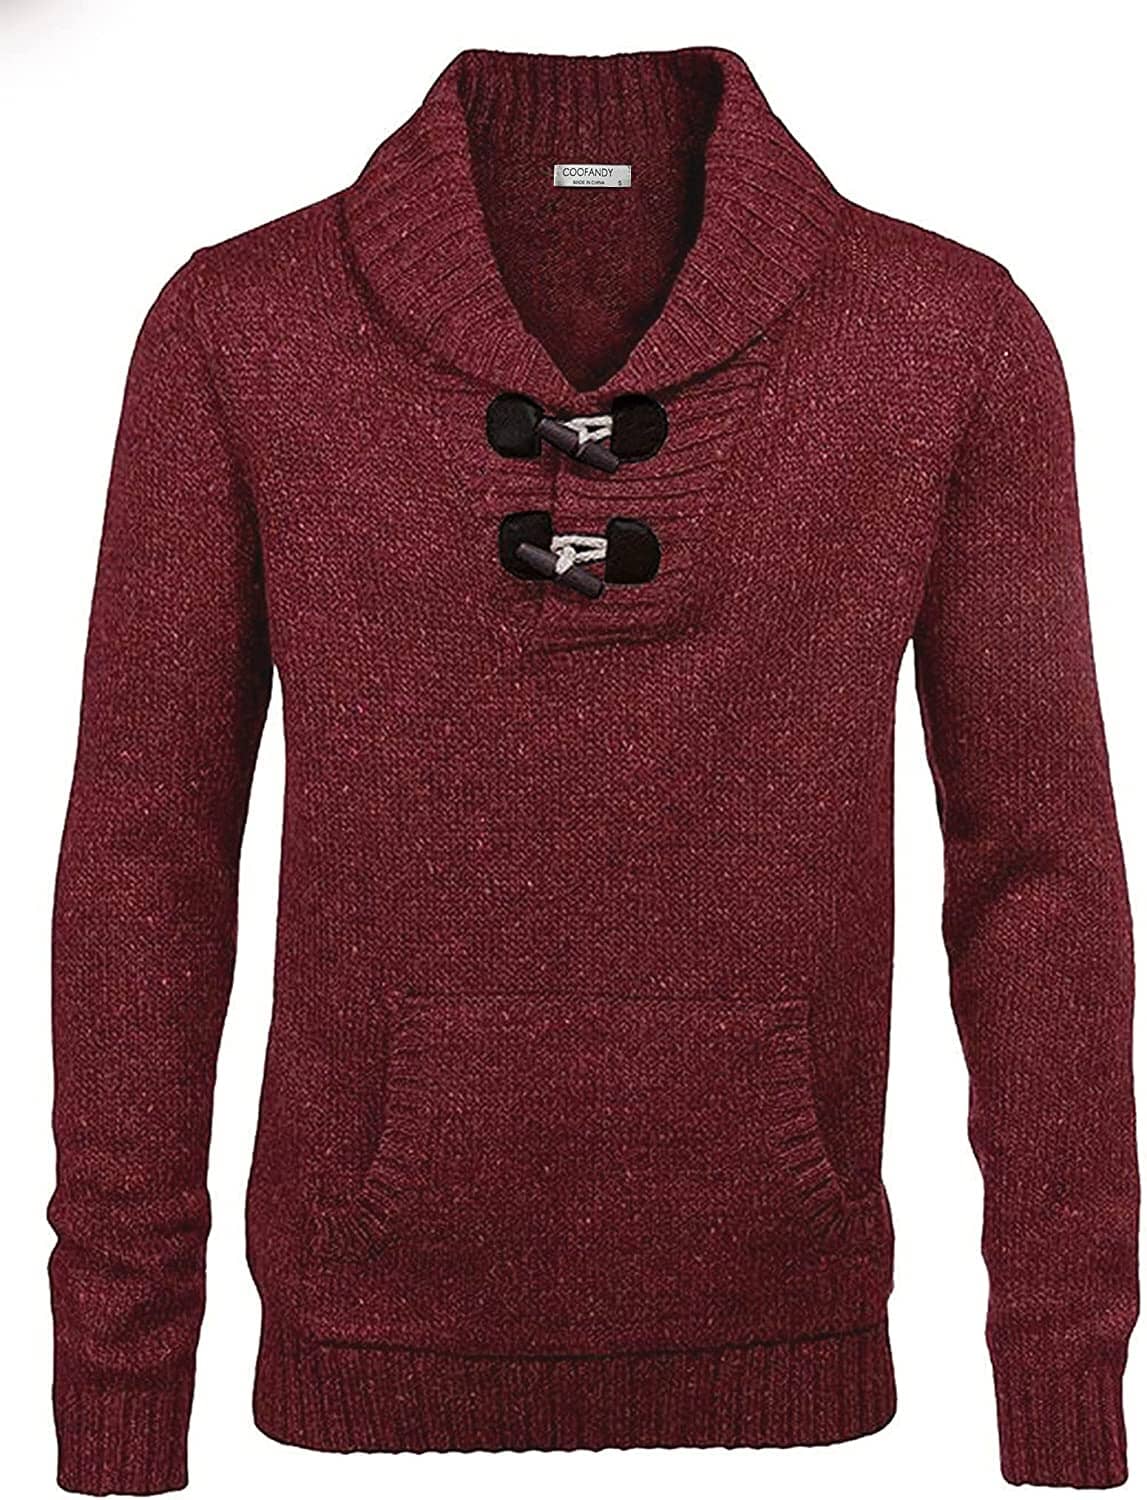 Shawl Collar Pullover Knit Sweaters with Pockets (US Only) Sweaters COOFANDY Store Wine Red S 